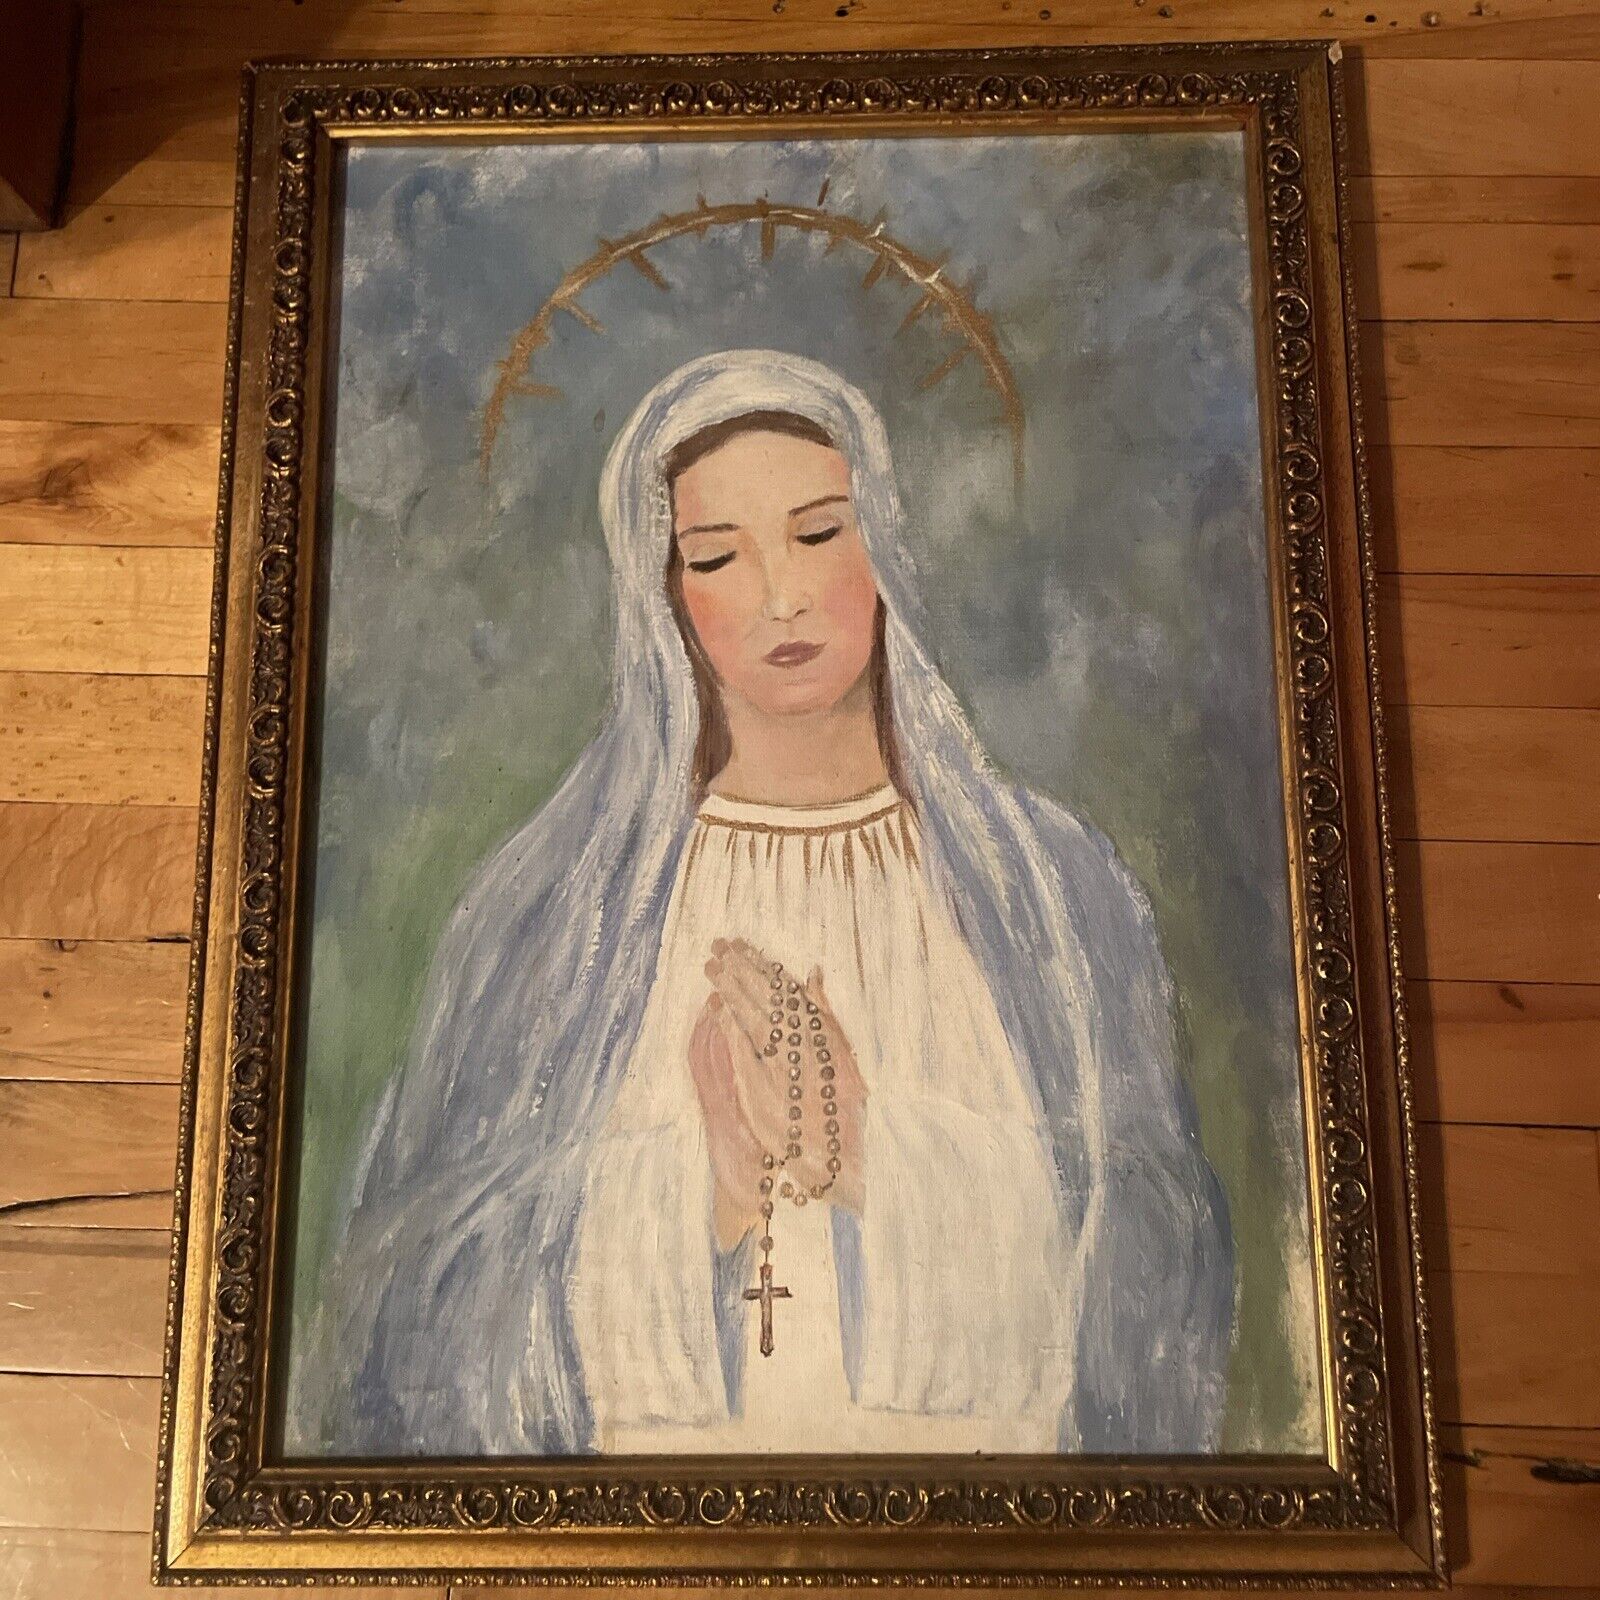 Vintage Immaculate Heart Of Mary Lithograph On Canvas Holding Rosary Beads